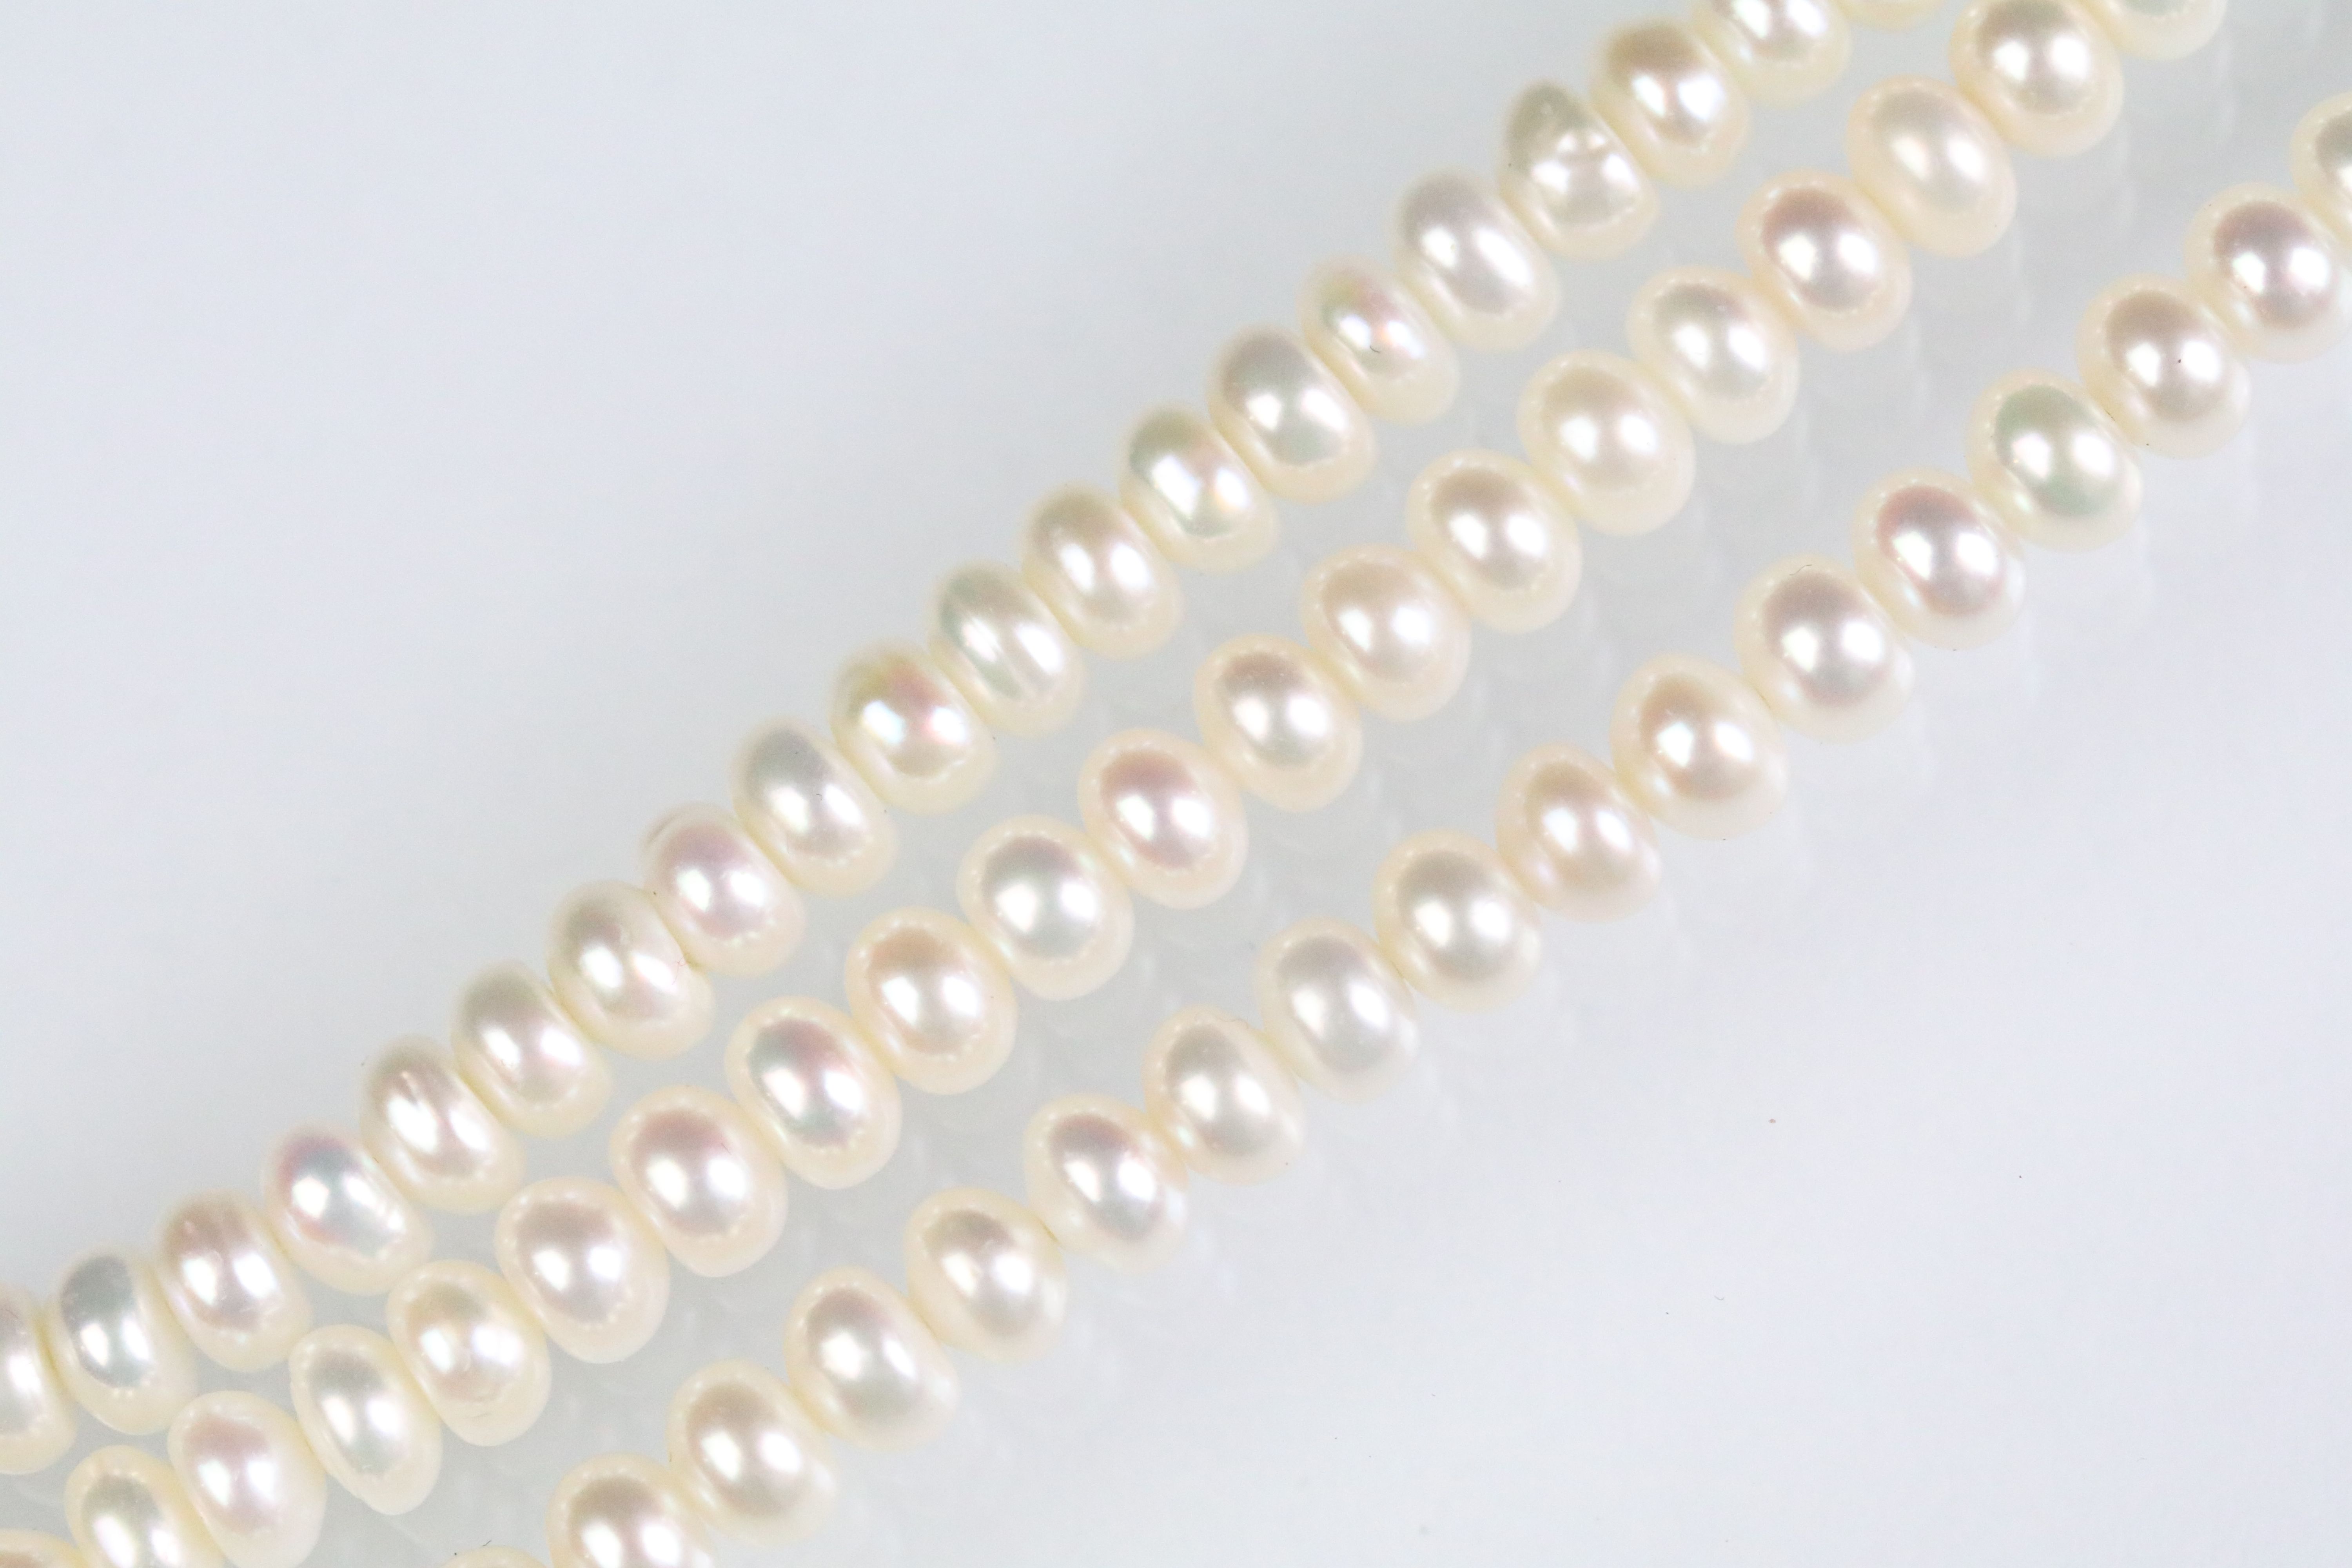 Cultured pearl necklace with a 14ct gold navette shaped clasp. Clasp marked 585. Measures 18 inches. - Image 2 of 4